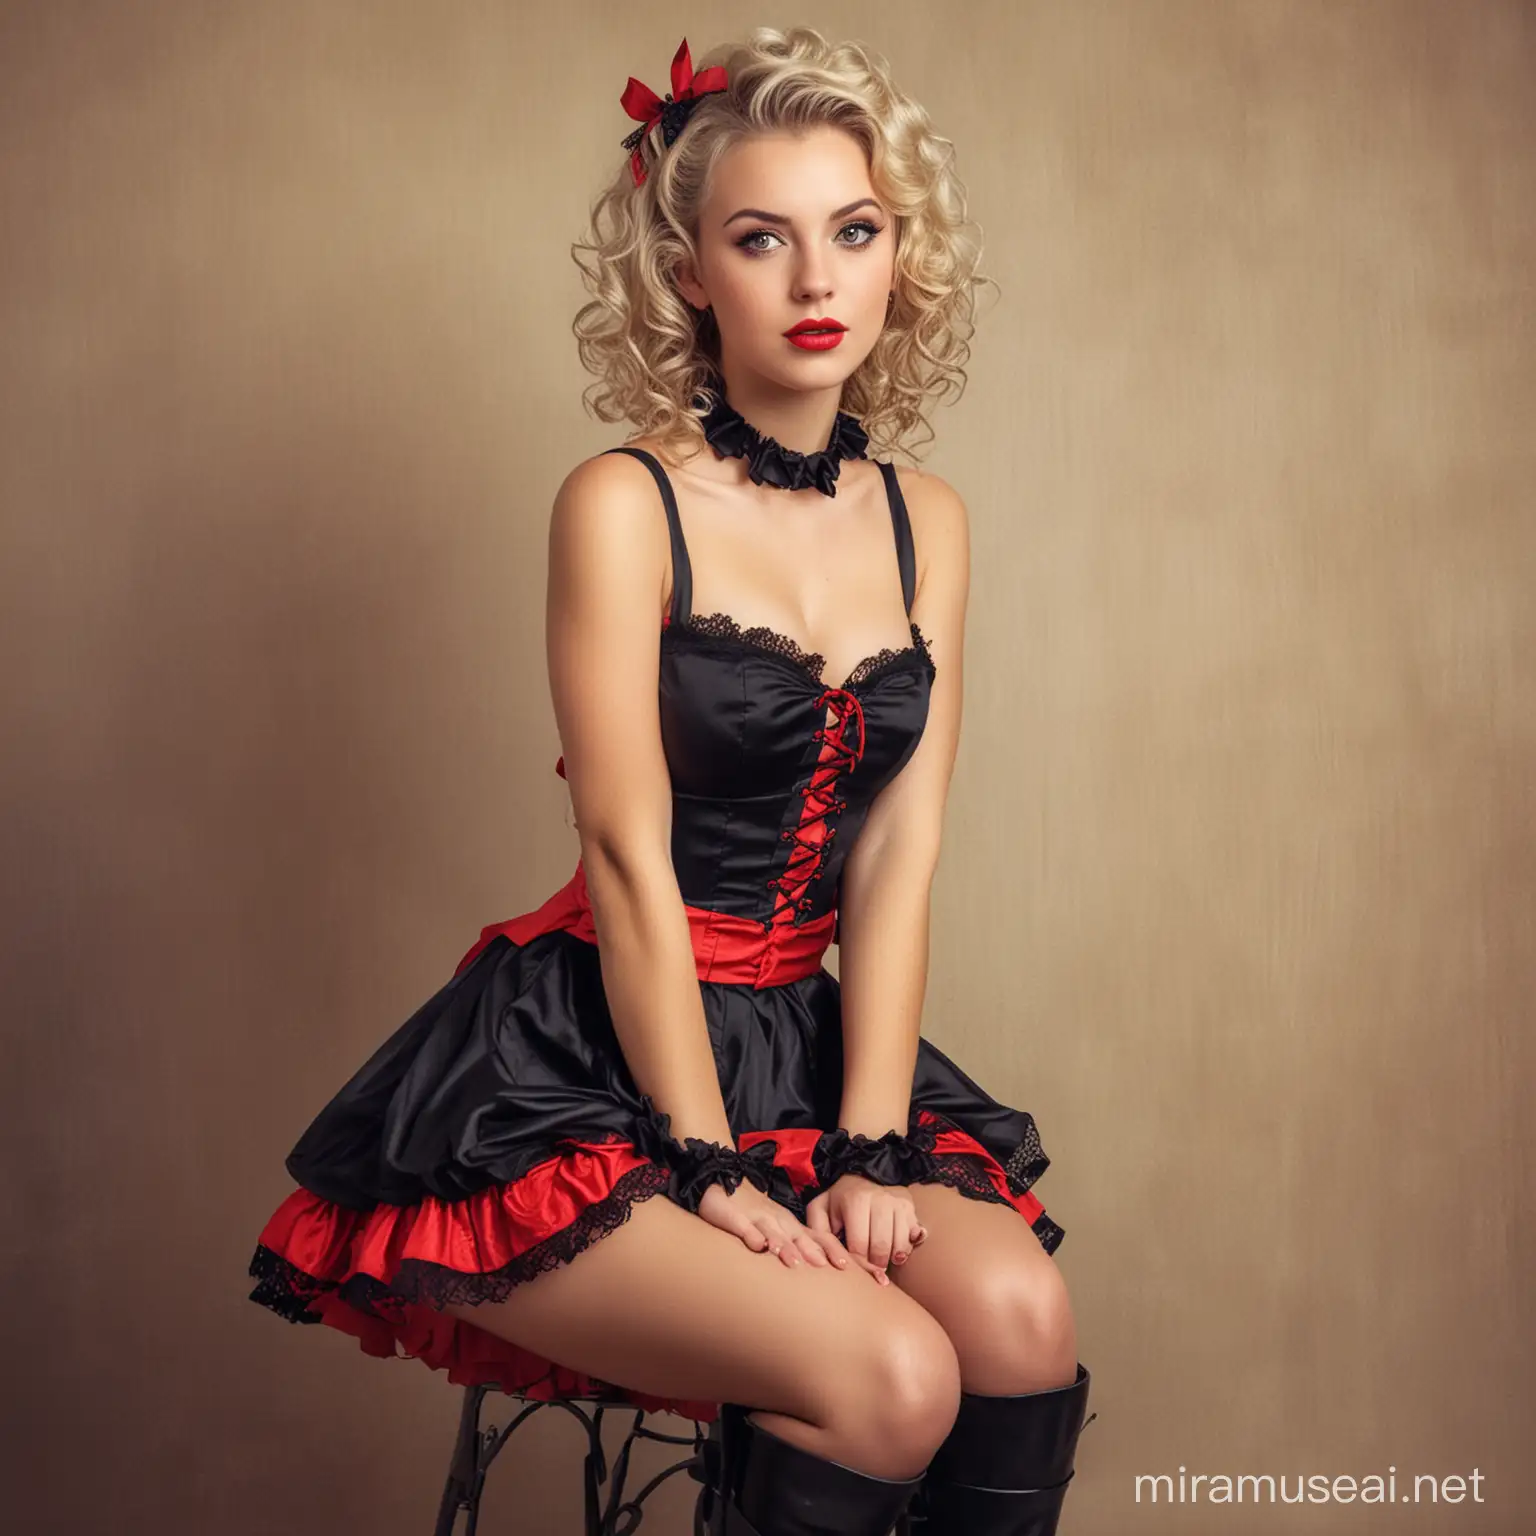 BlondeCurl Hairstyle Young Woman in LaceRuffle Black Dress with Red Accents